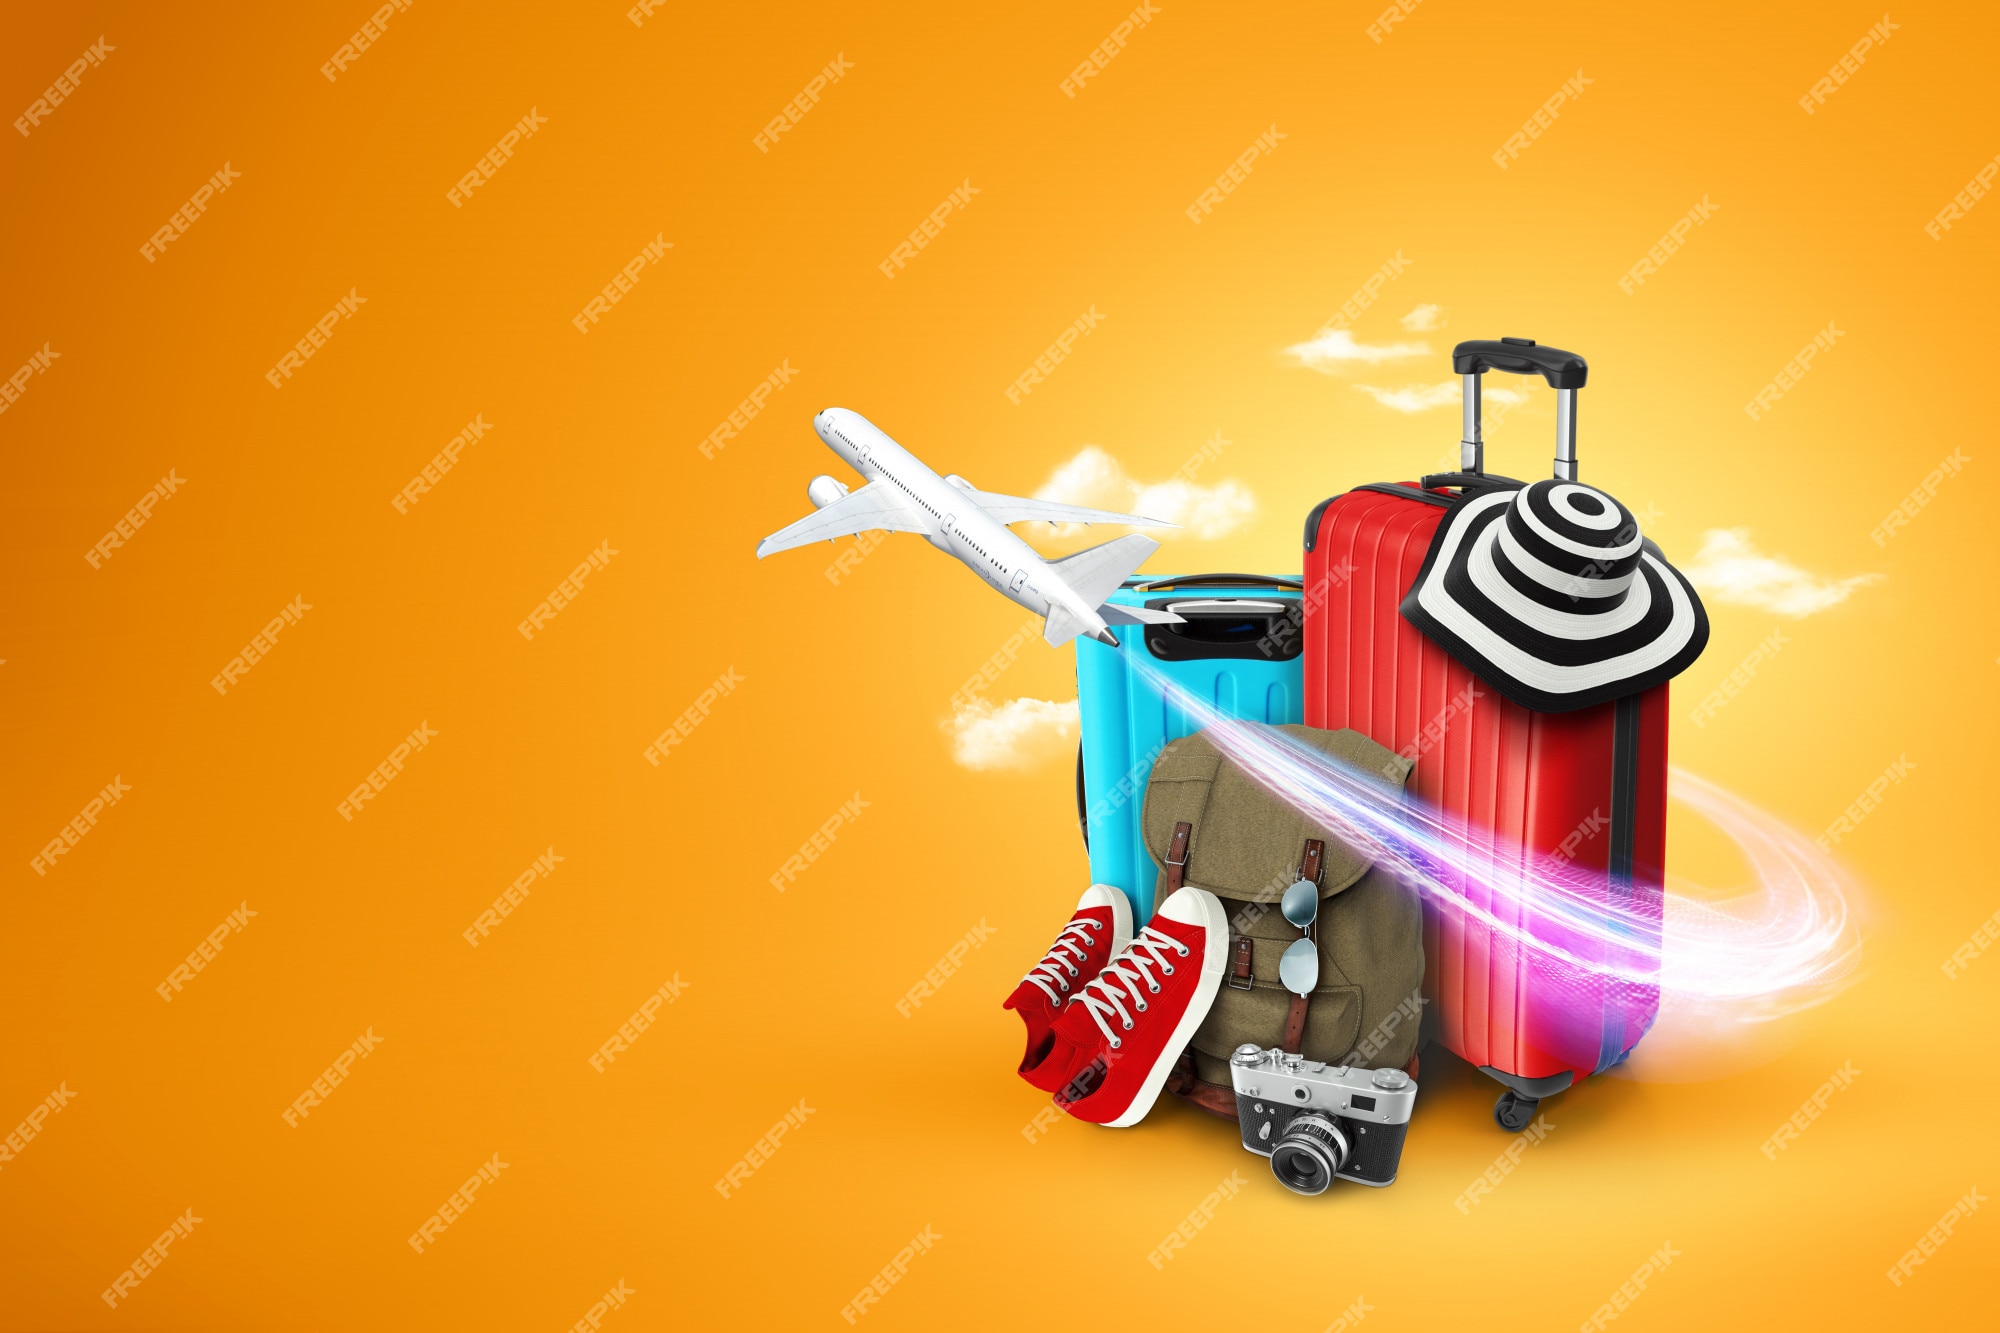 Premium Photo | Creative background, red suitcase, sneakers, plane on a  yellow background.